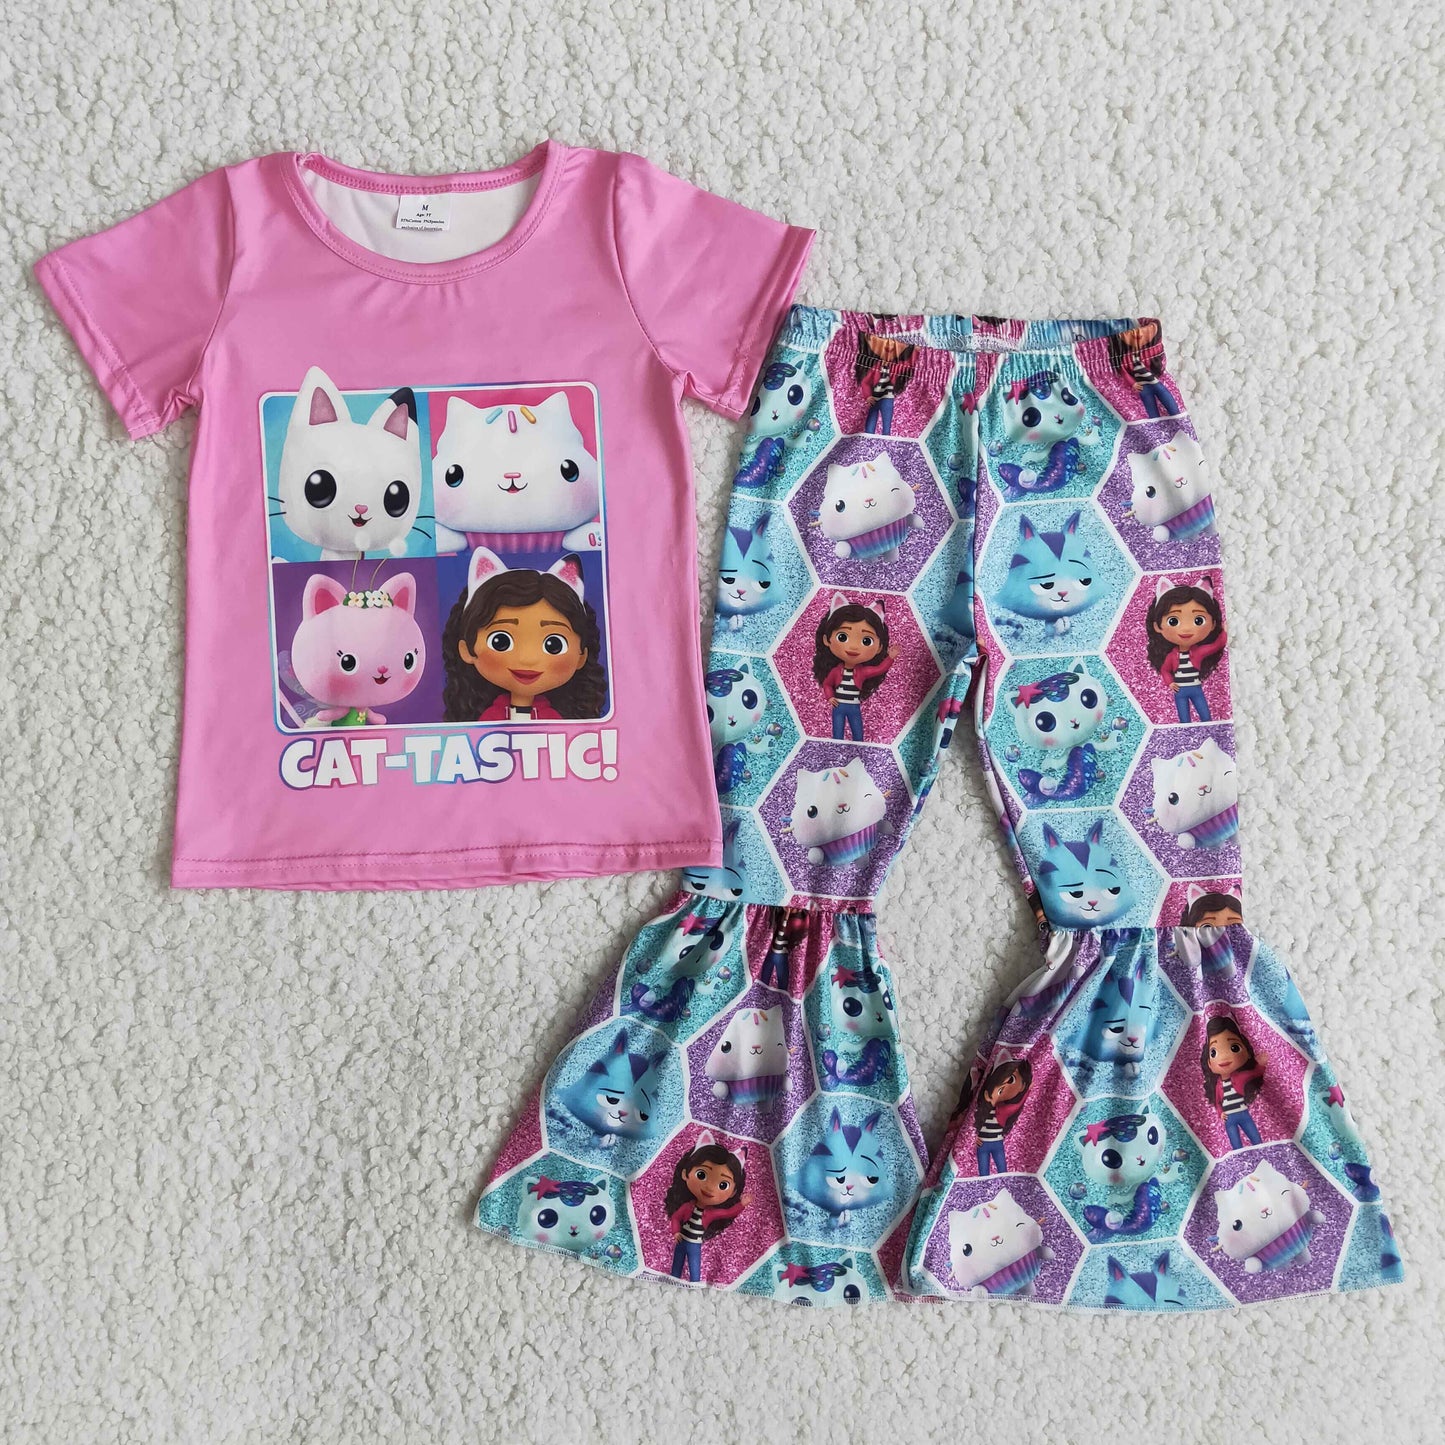 Toddle girls pink cartoon summer outfit